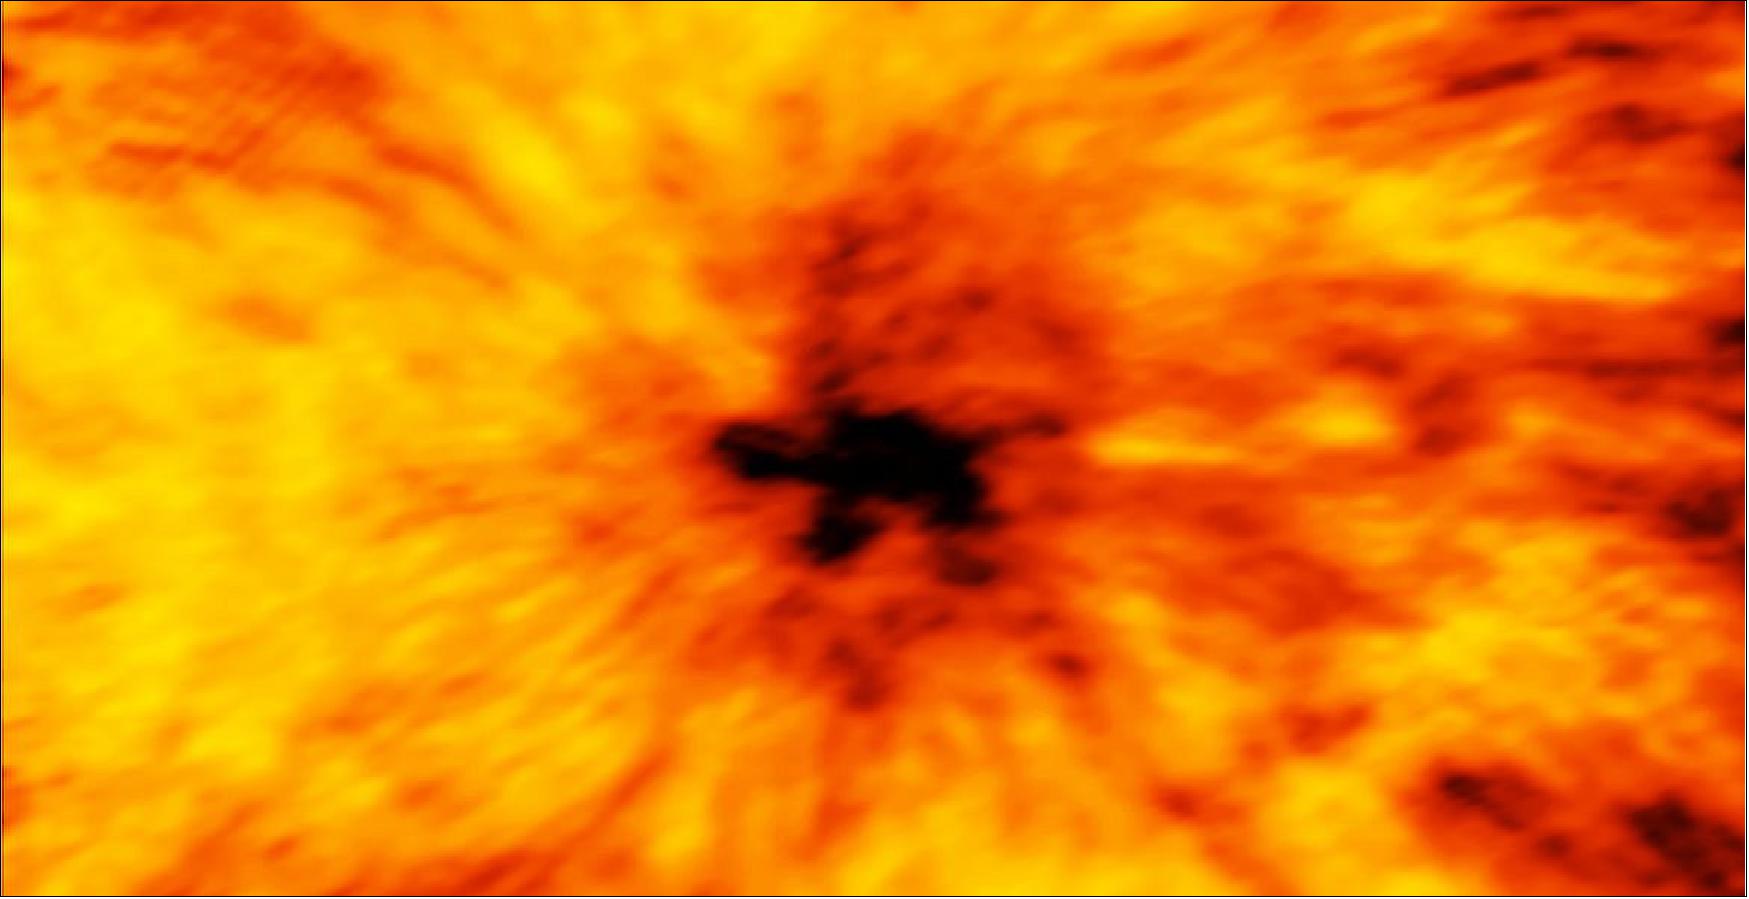 Figure 66: This ALMA image of an enormous sunspot was taken on 18 December 2015 with the Band 6 receiver at a wavelength of 1.25 mm. Sunspots are transient features that occur in regions where the Sun’s magnetic field is extremely concentrated and powerful. They are lower in temperature than their surrounding regions, which is why they appear relatively dark in visible light. The ALMA image is essentially a map of temperature differences in a layer of the Sun's atmosphere known as the chromosphere, which lies just above the visible surface of the Sun (the photosphere). The chromosphere is considerably hotter than the photosphere. Understanding the heating and dynamics of the chromosphere are key areas of research that will be addressed by ALMA. Observations at shorter wavelengths probe deeper into the solar chromosphere than longer wavelengths. Hence, band 6 observations map a layer of the chromosphere that is closer to the visible surface of the Sun than band 3 observations [image credit: ALMA (ESO/NAOJ/NRAO)]